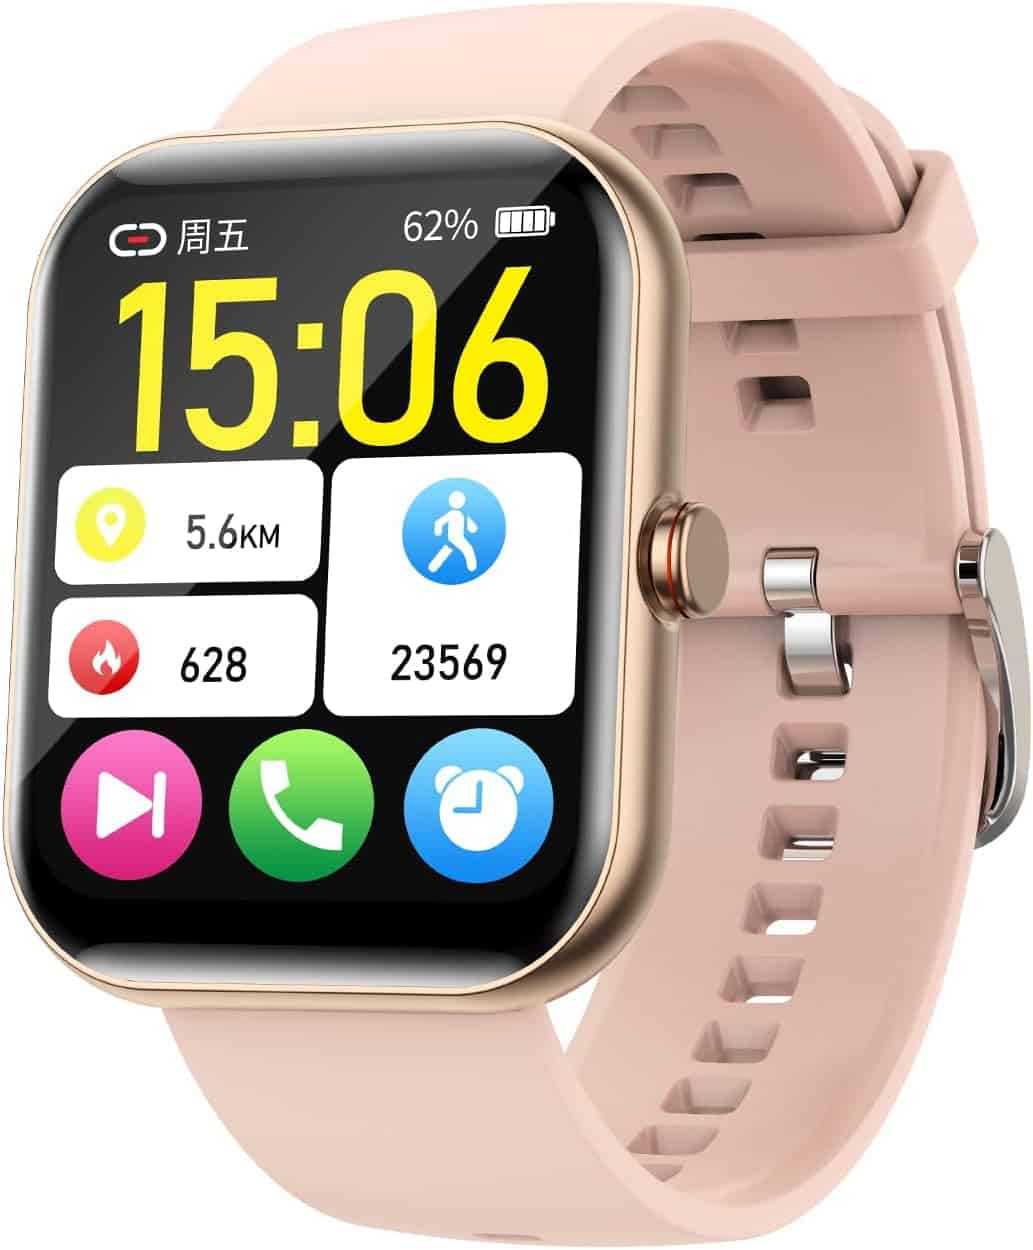 SOMTLERK Smart Watch for Women: The Ultimate Fitness Tracker and Fashion Accessory